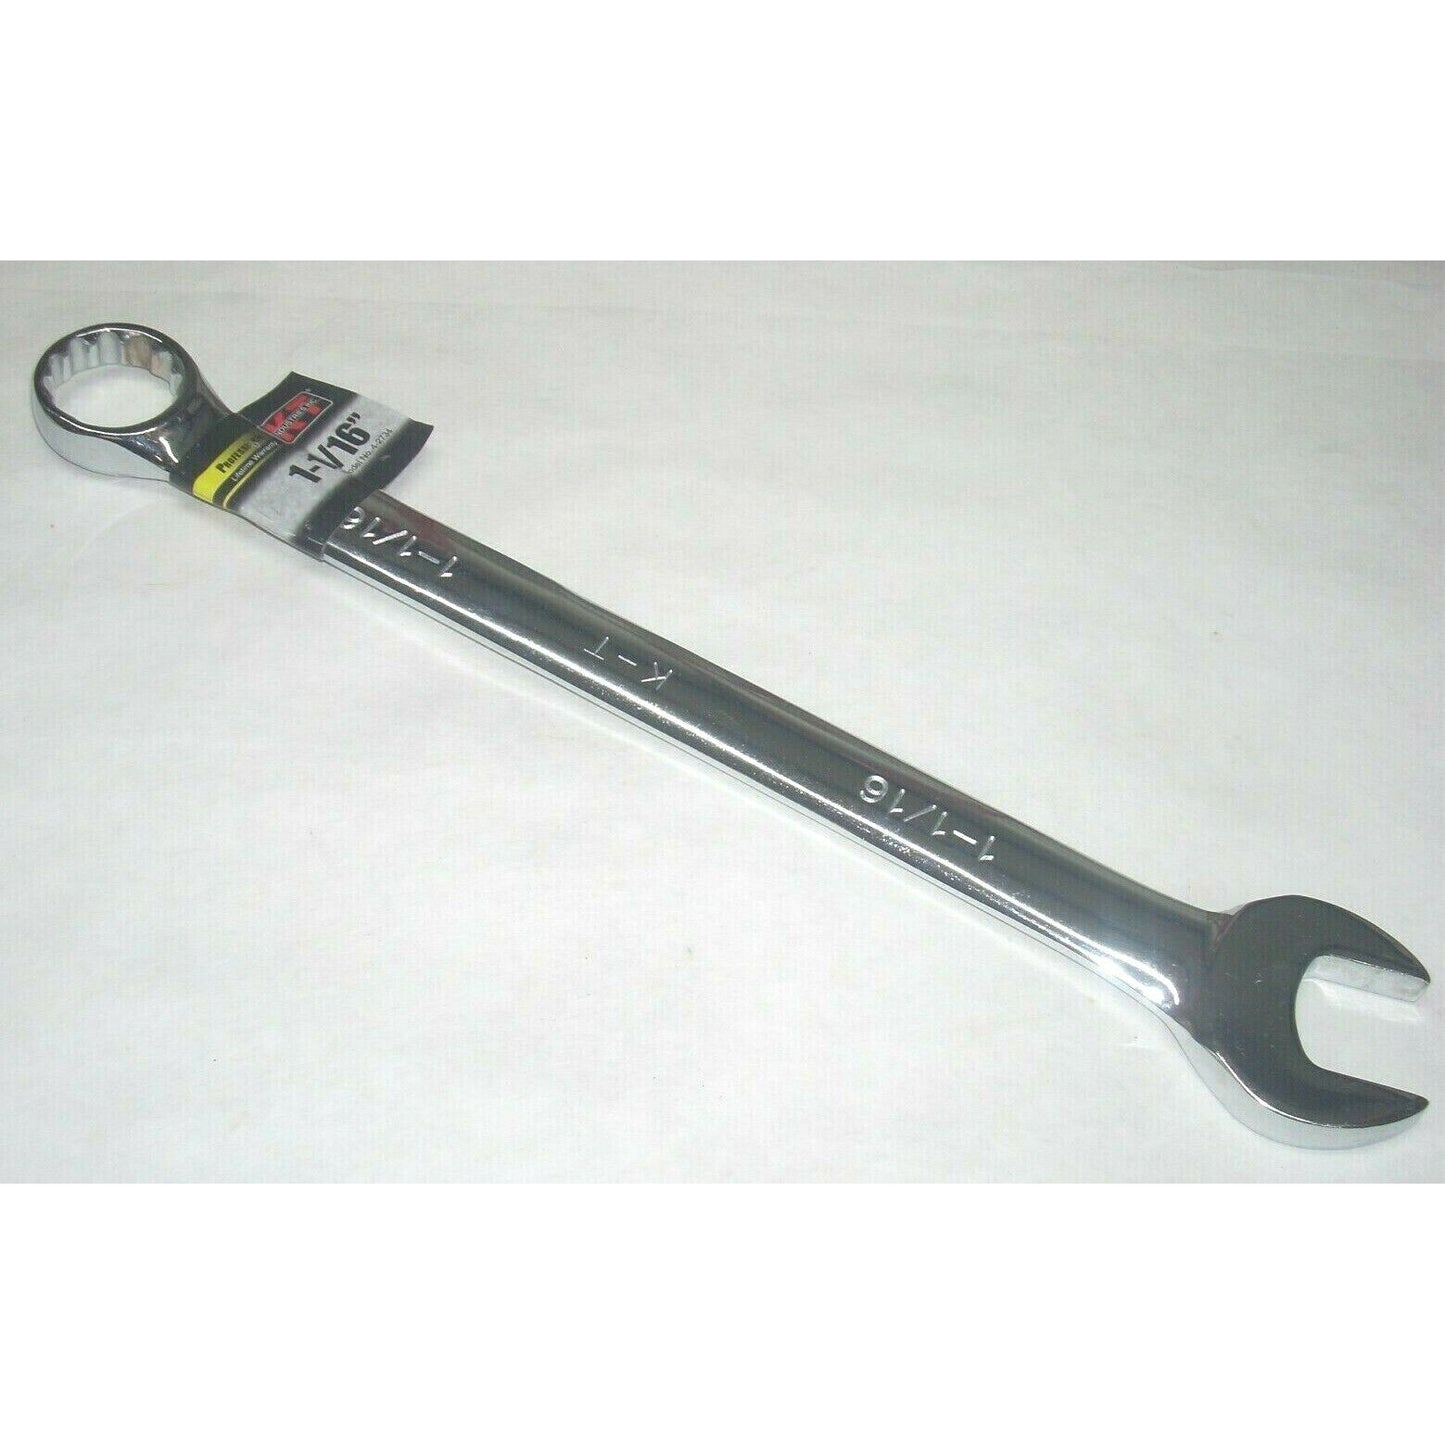 KT Industries 4-2734 Combination Wrench 1 1/16"